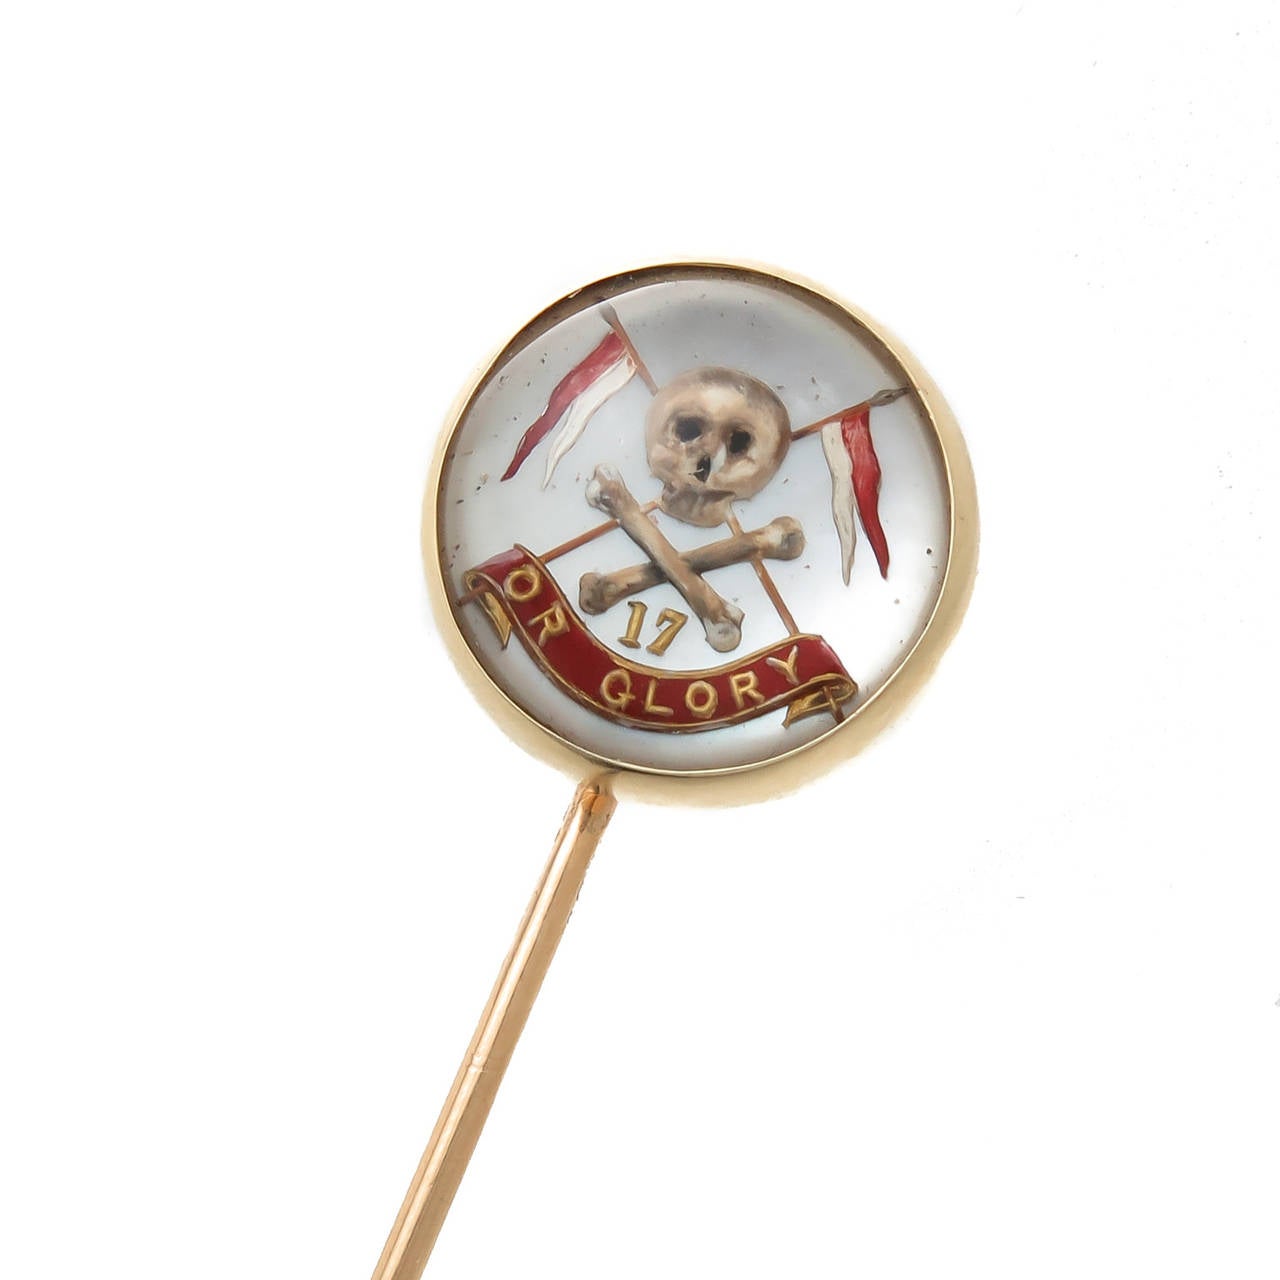 Circa 1910 18ct Yellow Gold and reverse painted Crystal stick pin featuring the Skull and Crossbones symbol for Death or Glory. Very Nicely Detailed, and having an 18ct Stamp making this possibly British in origin.  Crystal measures 12 MM in